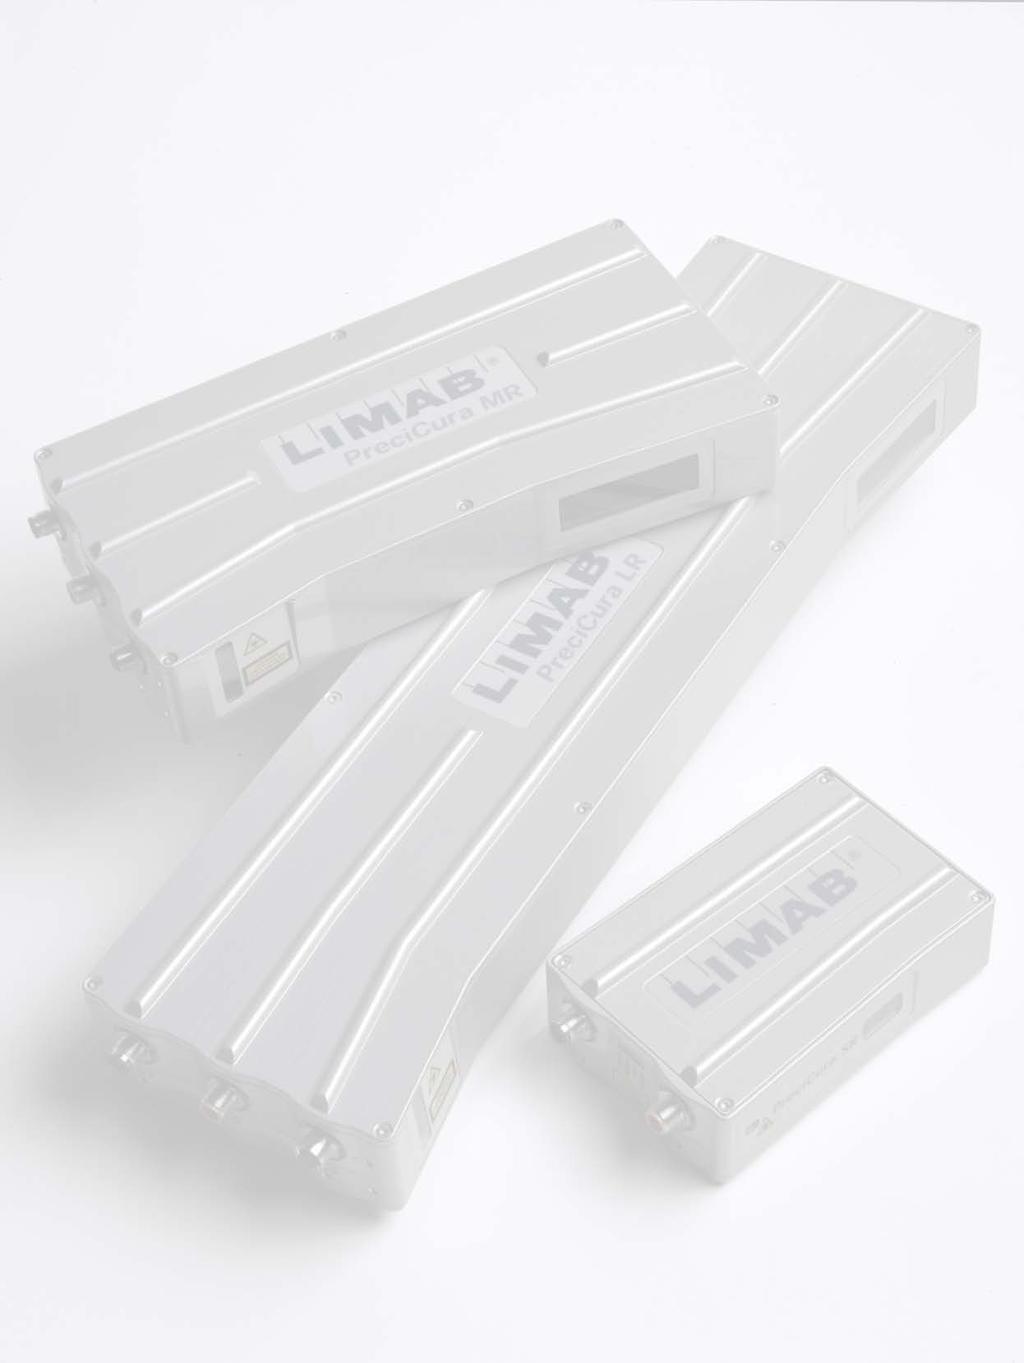 Since it was founded in 1979, LIMAB has supplied non-contact measuring sensors and solutions.